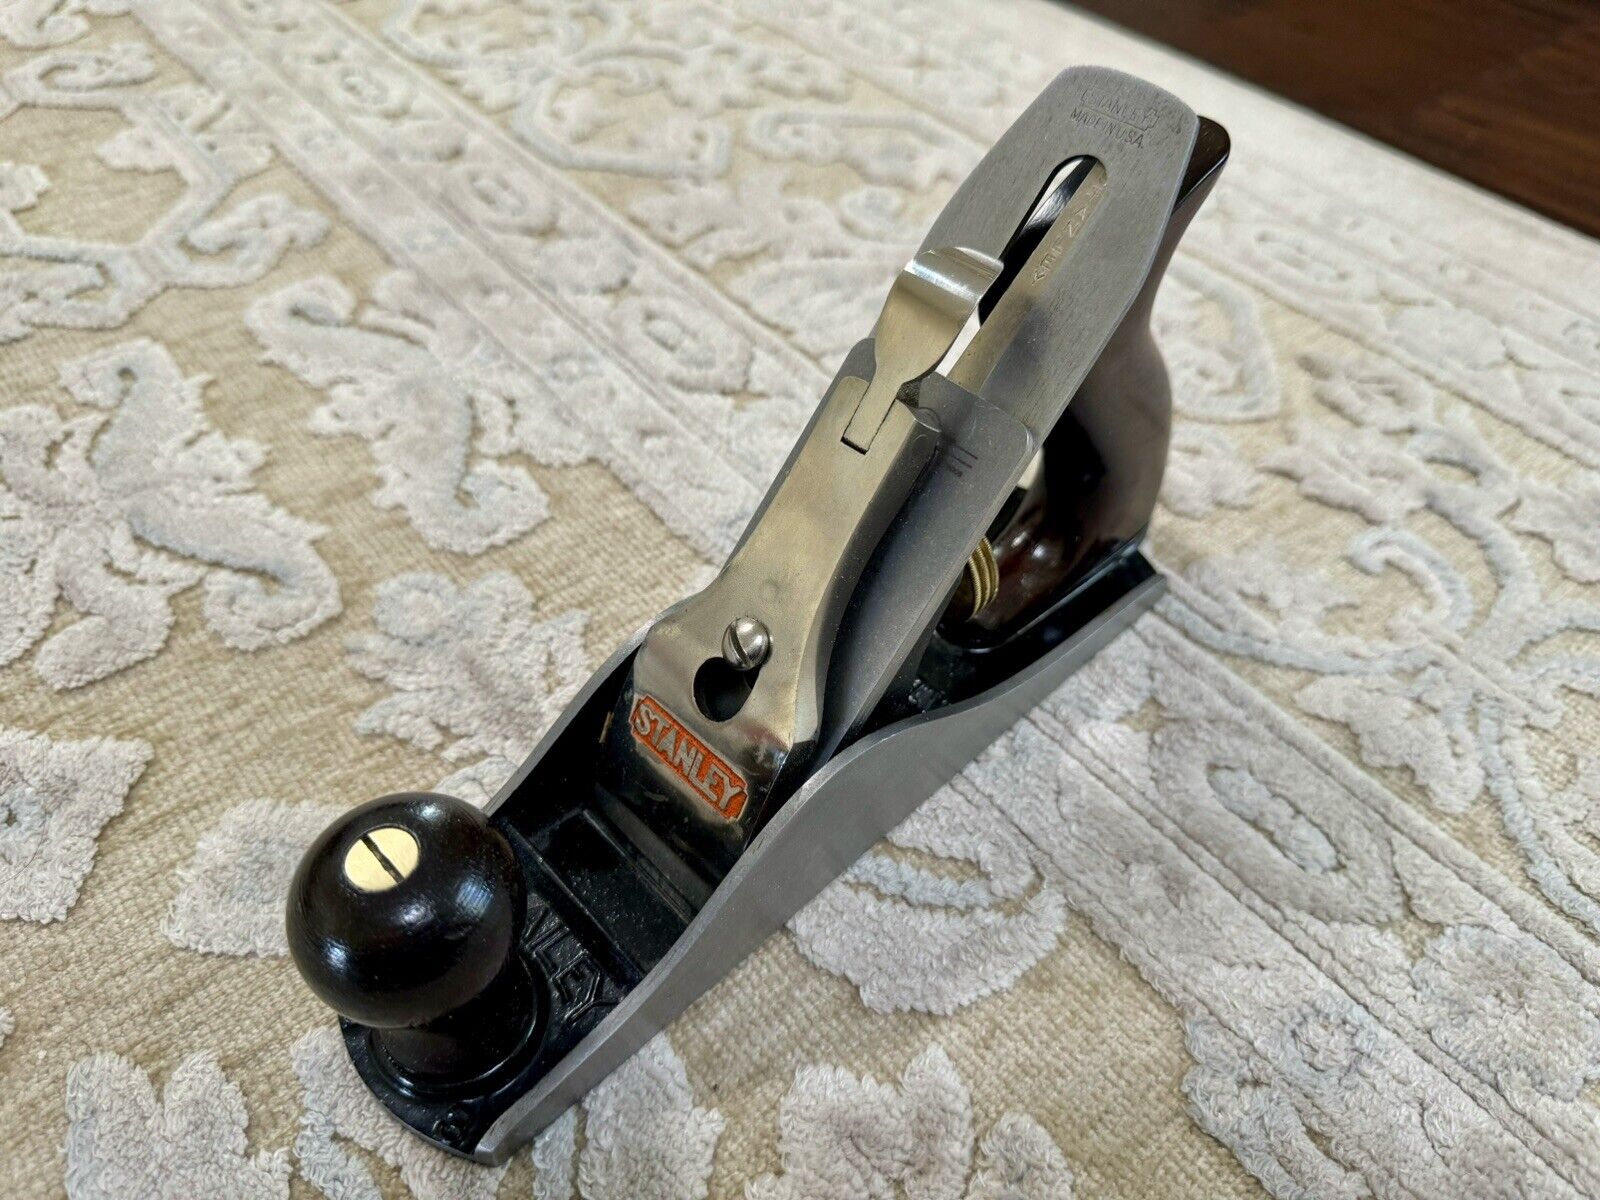 Vintage Stanley Bailey No. 3 Type 19 Smoothing Plane, Pristine Condition, Sharp.